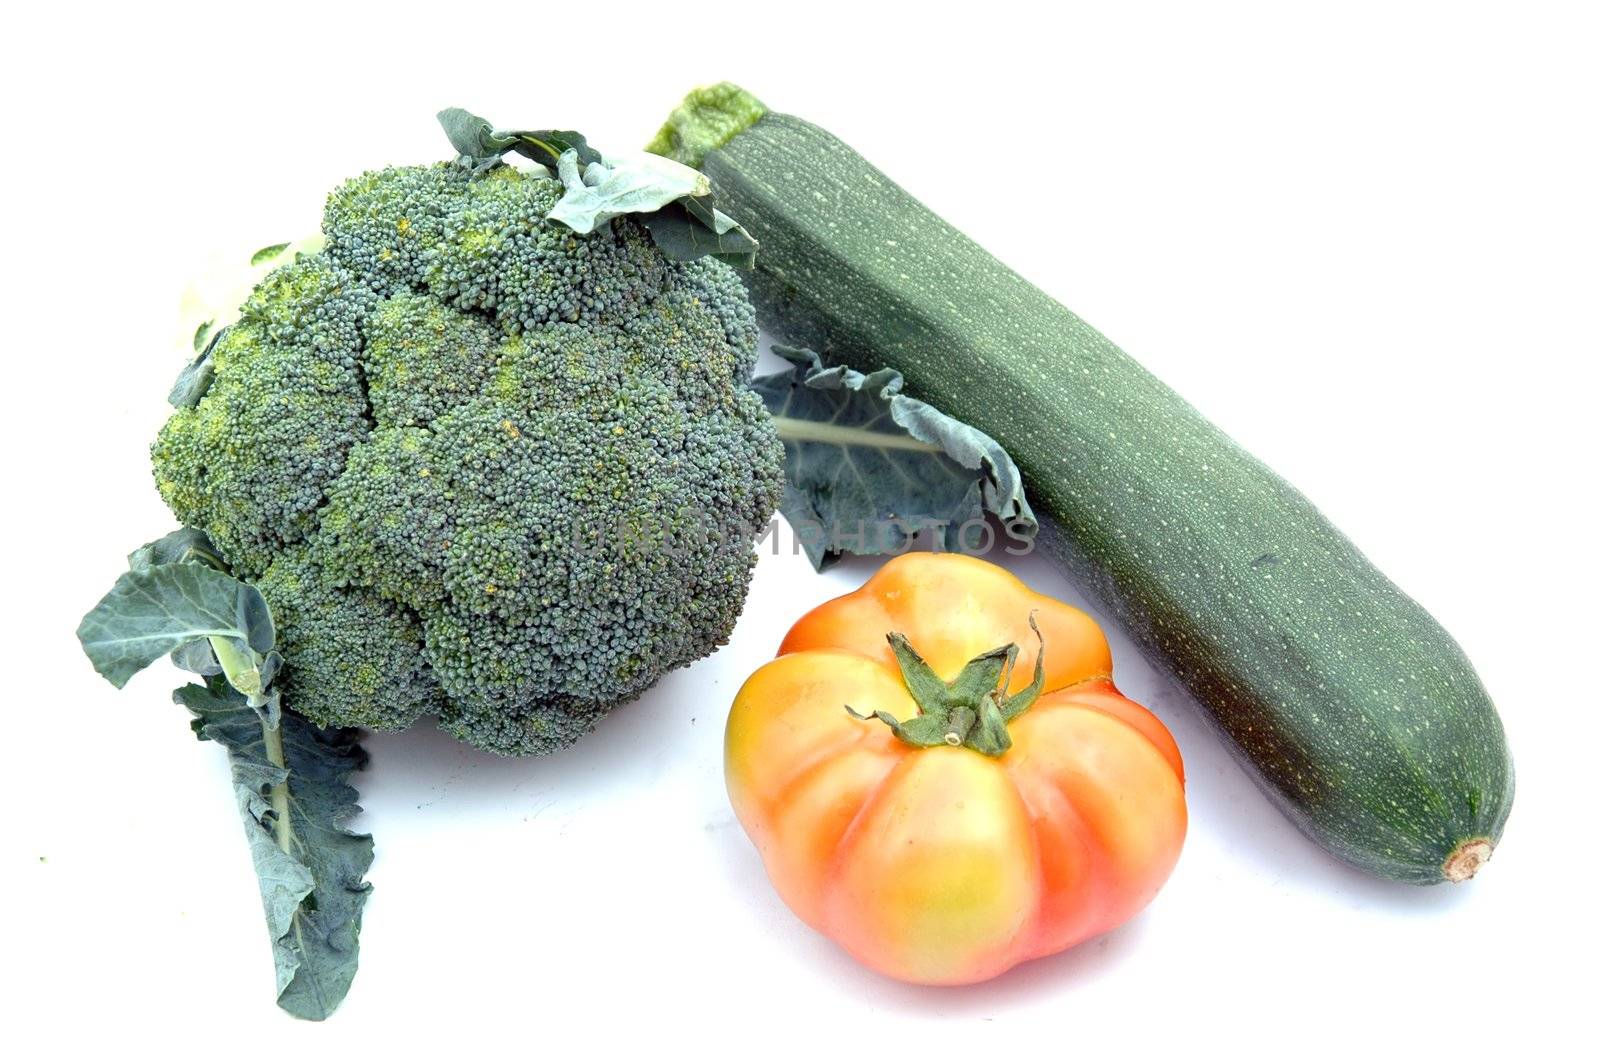 tomato, broccolis and courgette by raalves